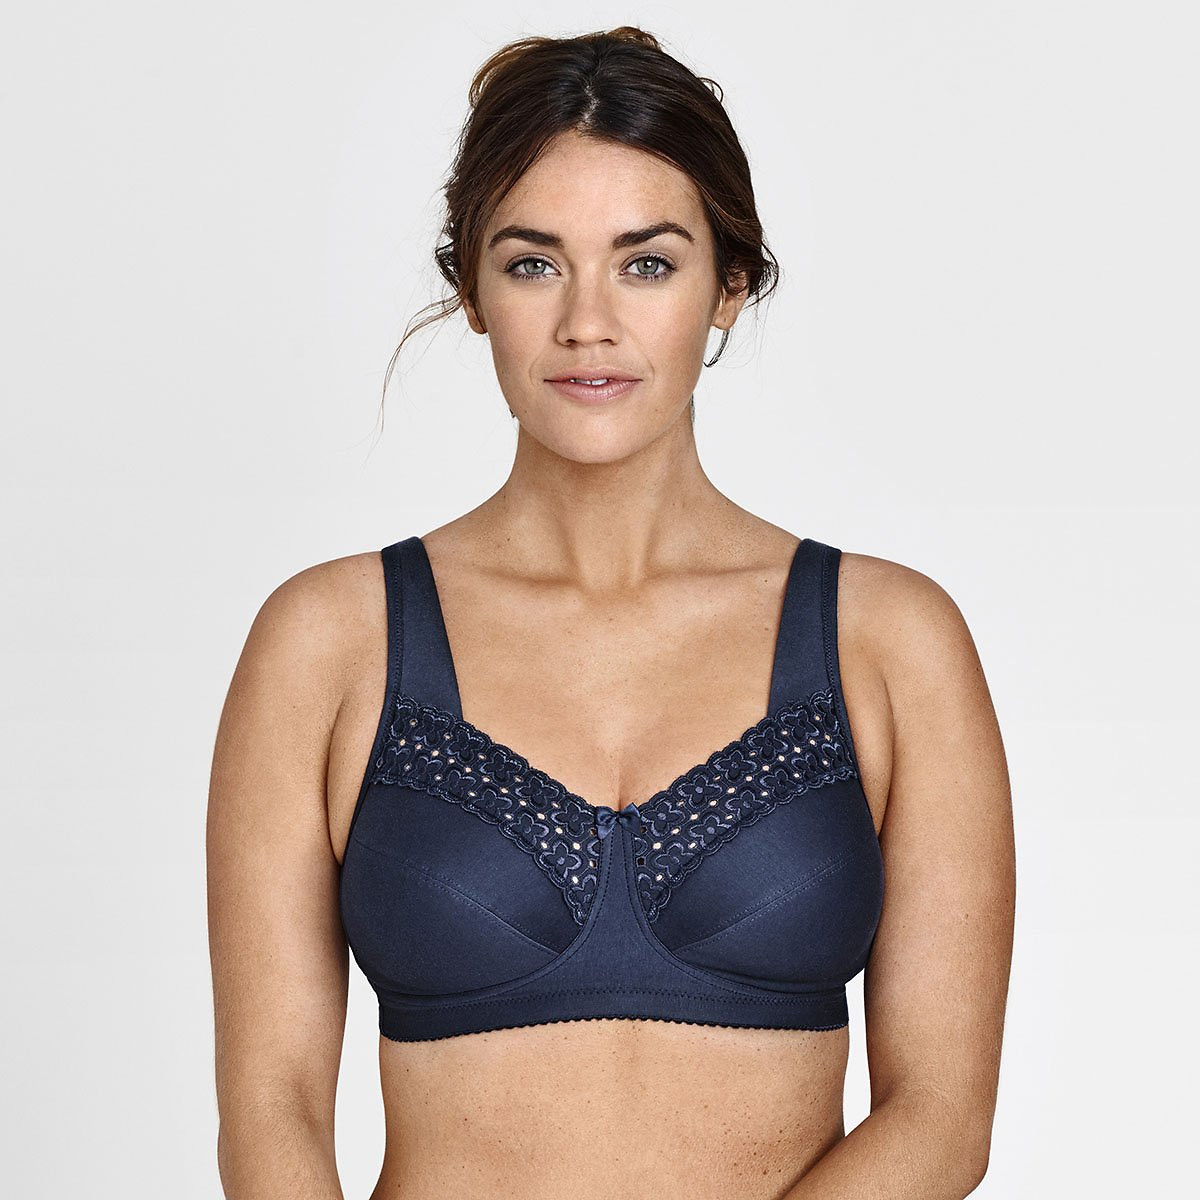 Cotton mix minimiser bra without underwiring Miss Mary Of Sweden La Redoute